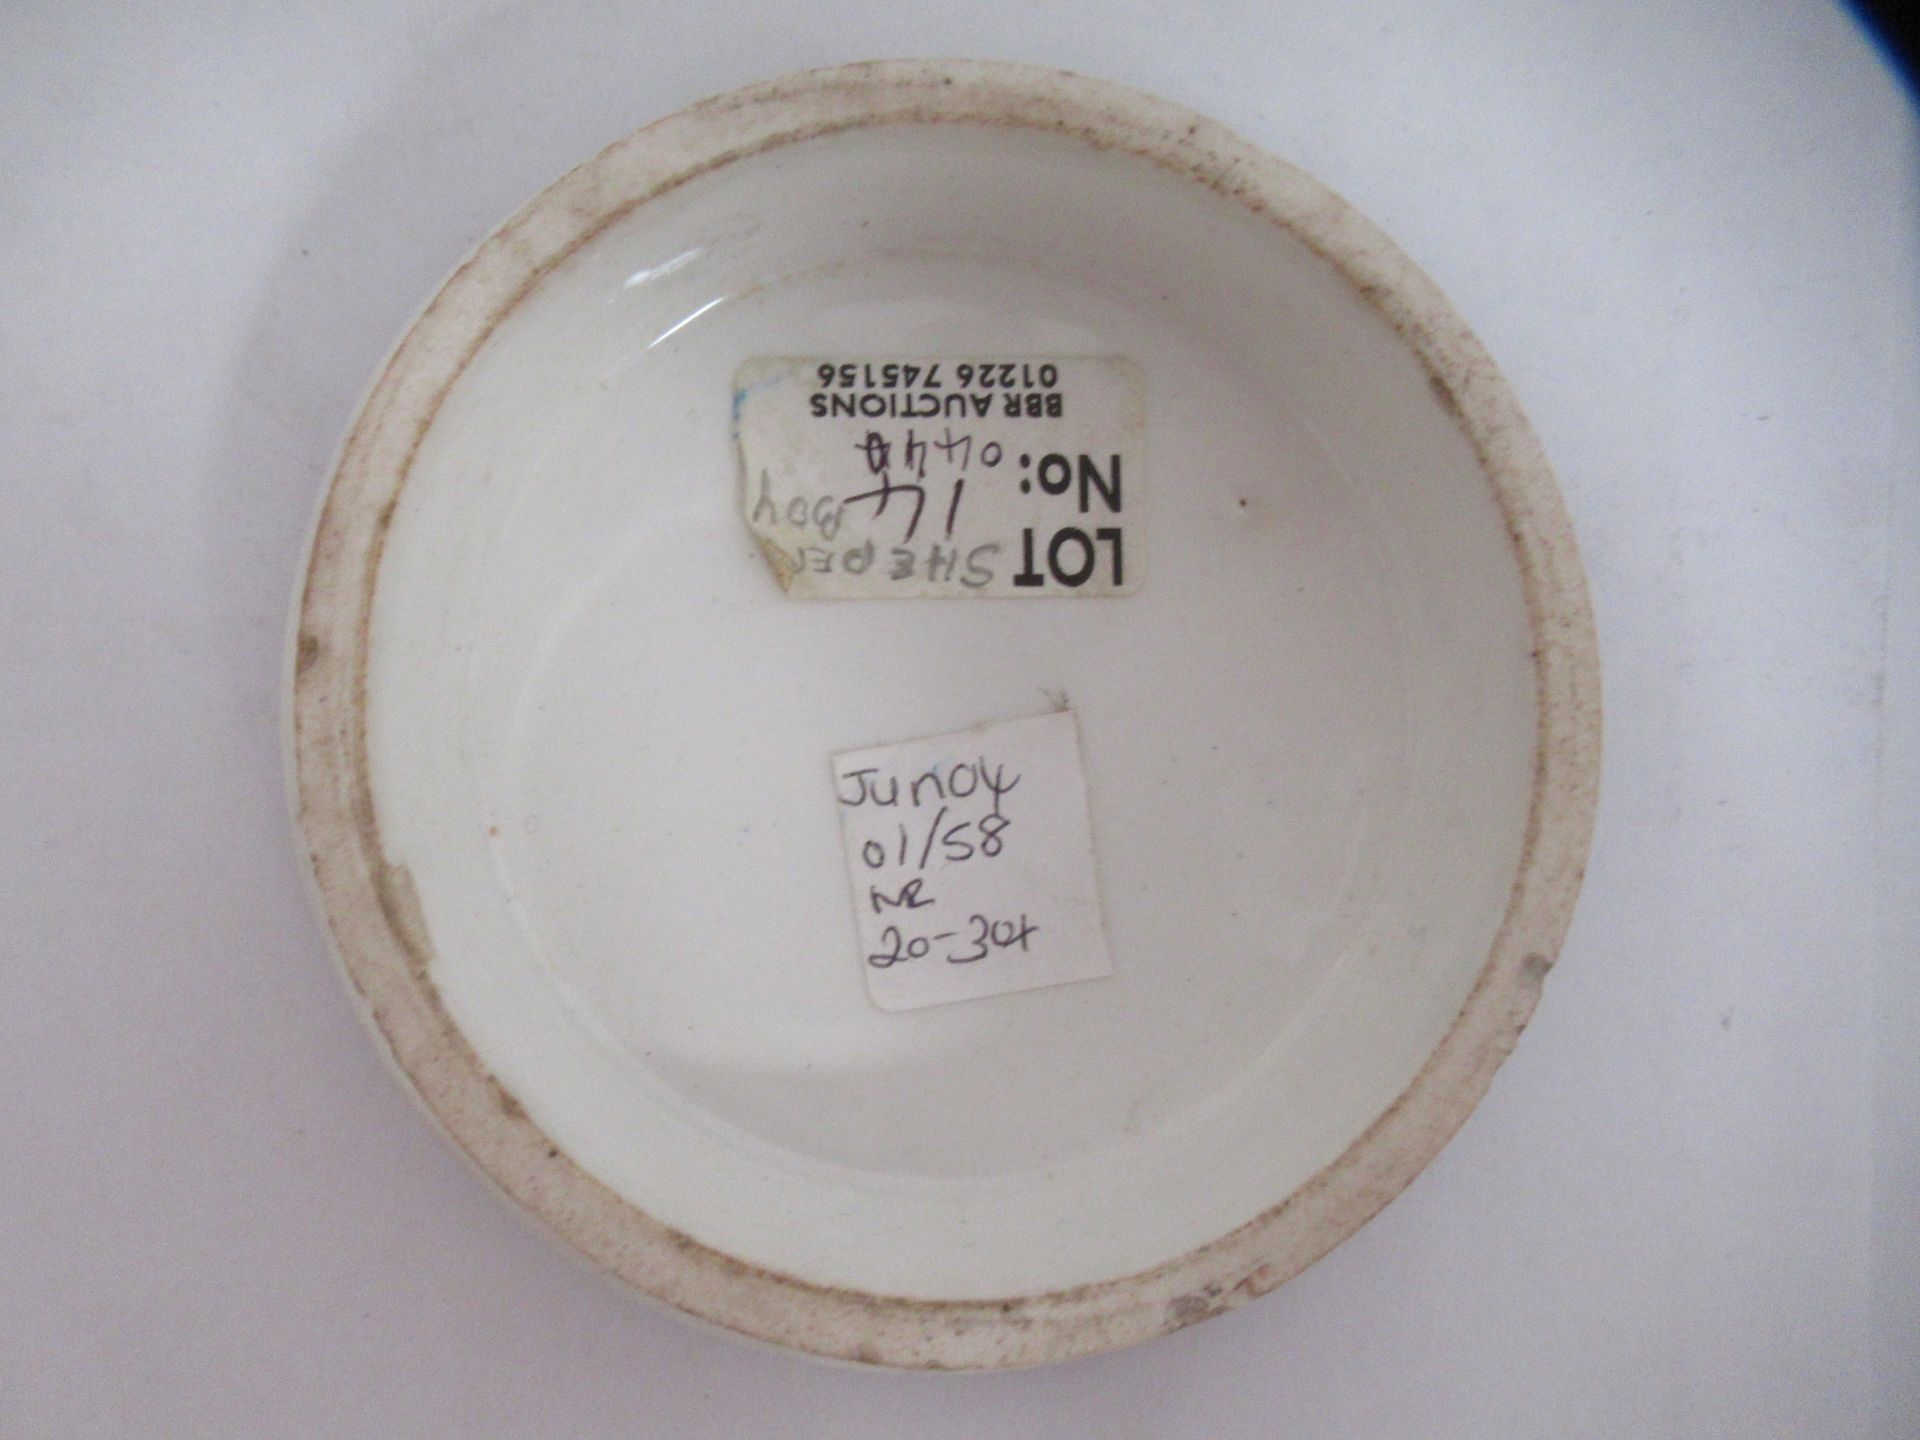 6x Prattware ceramic lids including 'Royal Harbour Ramsgate', 'The Chin-Chew River', 'Contrast', and - Image 8 of 21